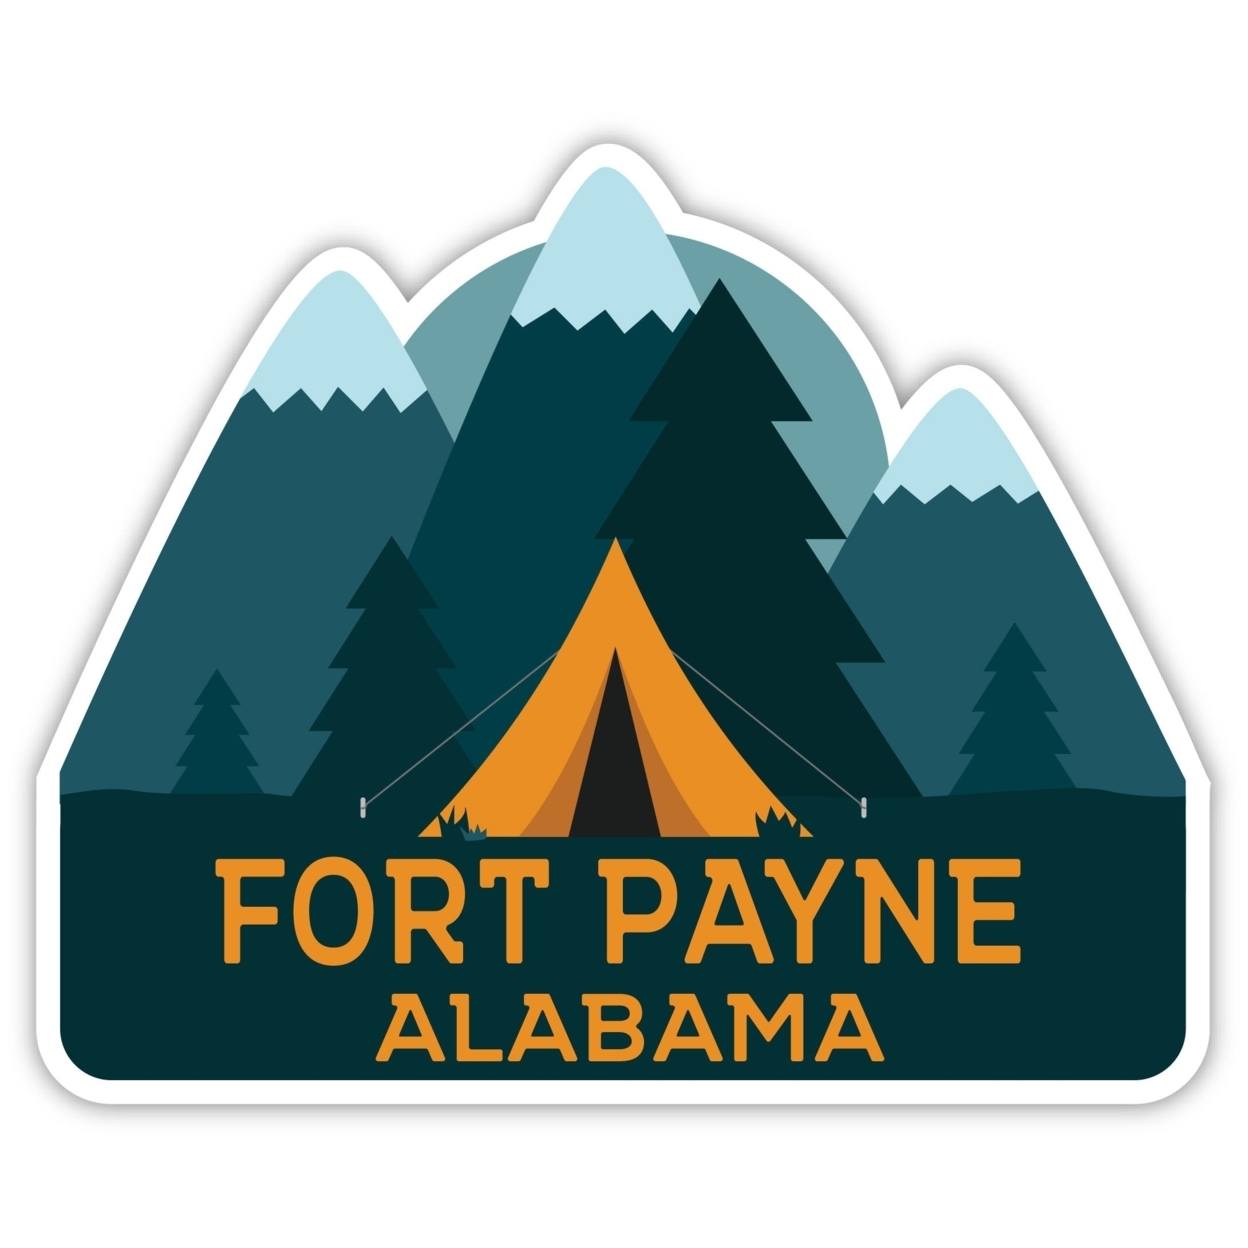 Fort Payne Alabama Souvenir Decorative Stickers (Choose Theme And Size) - 4-Pack, 12-Inch, Adventures Awaits